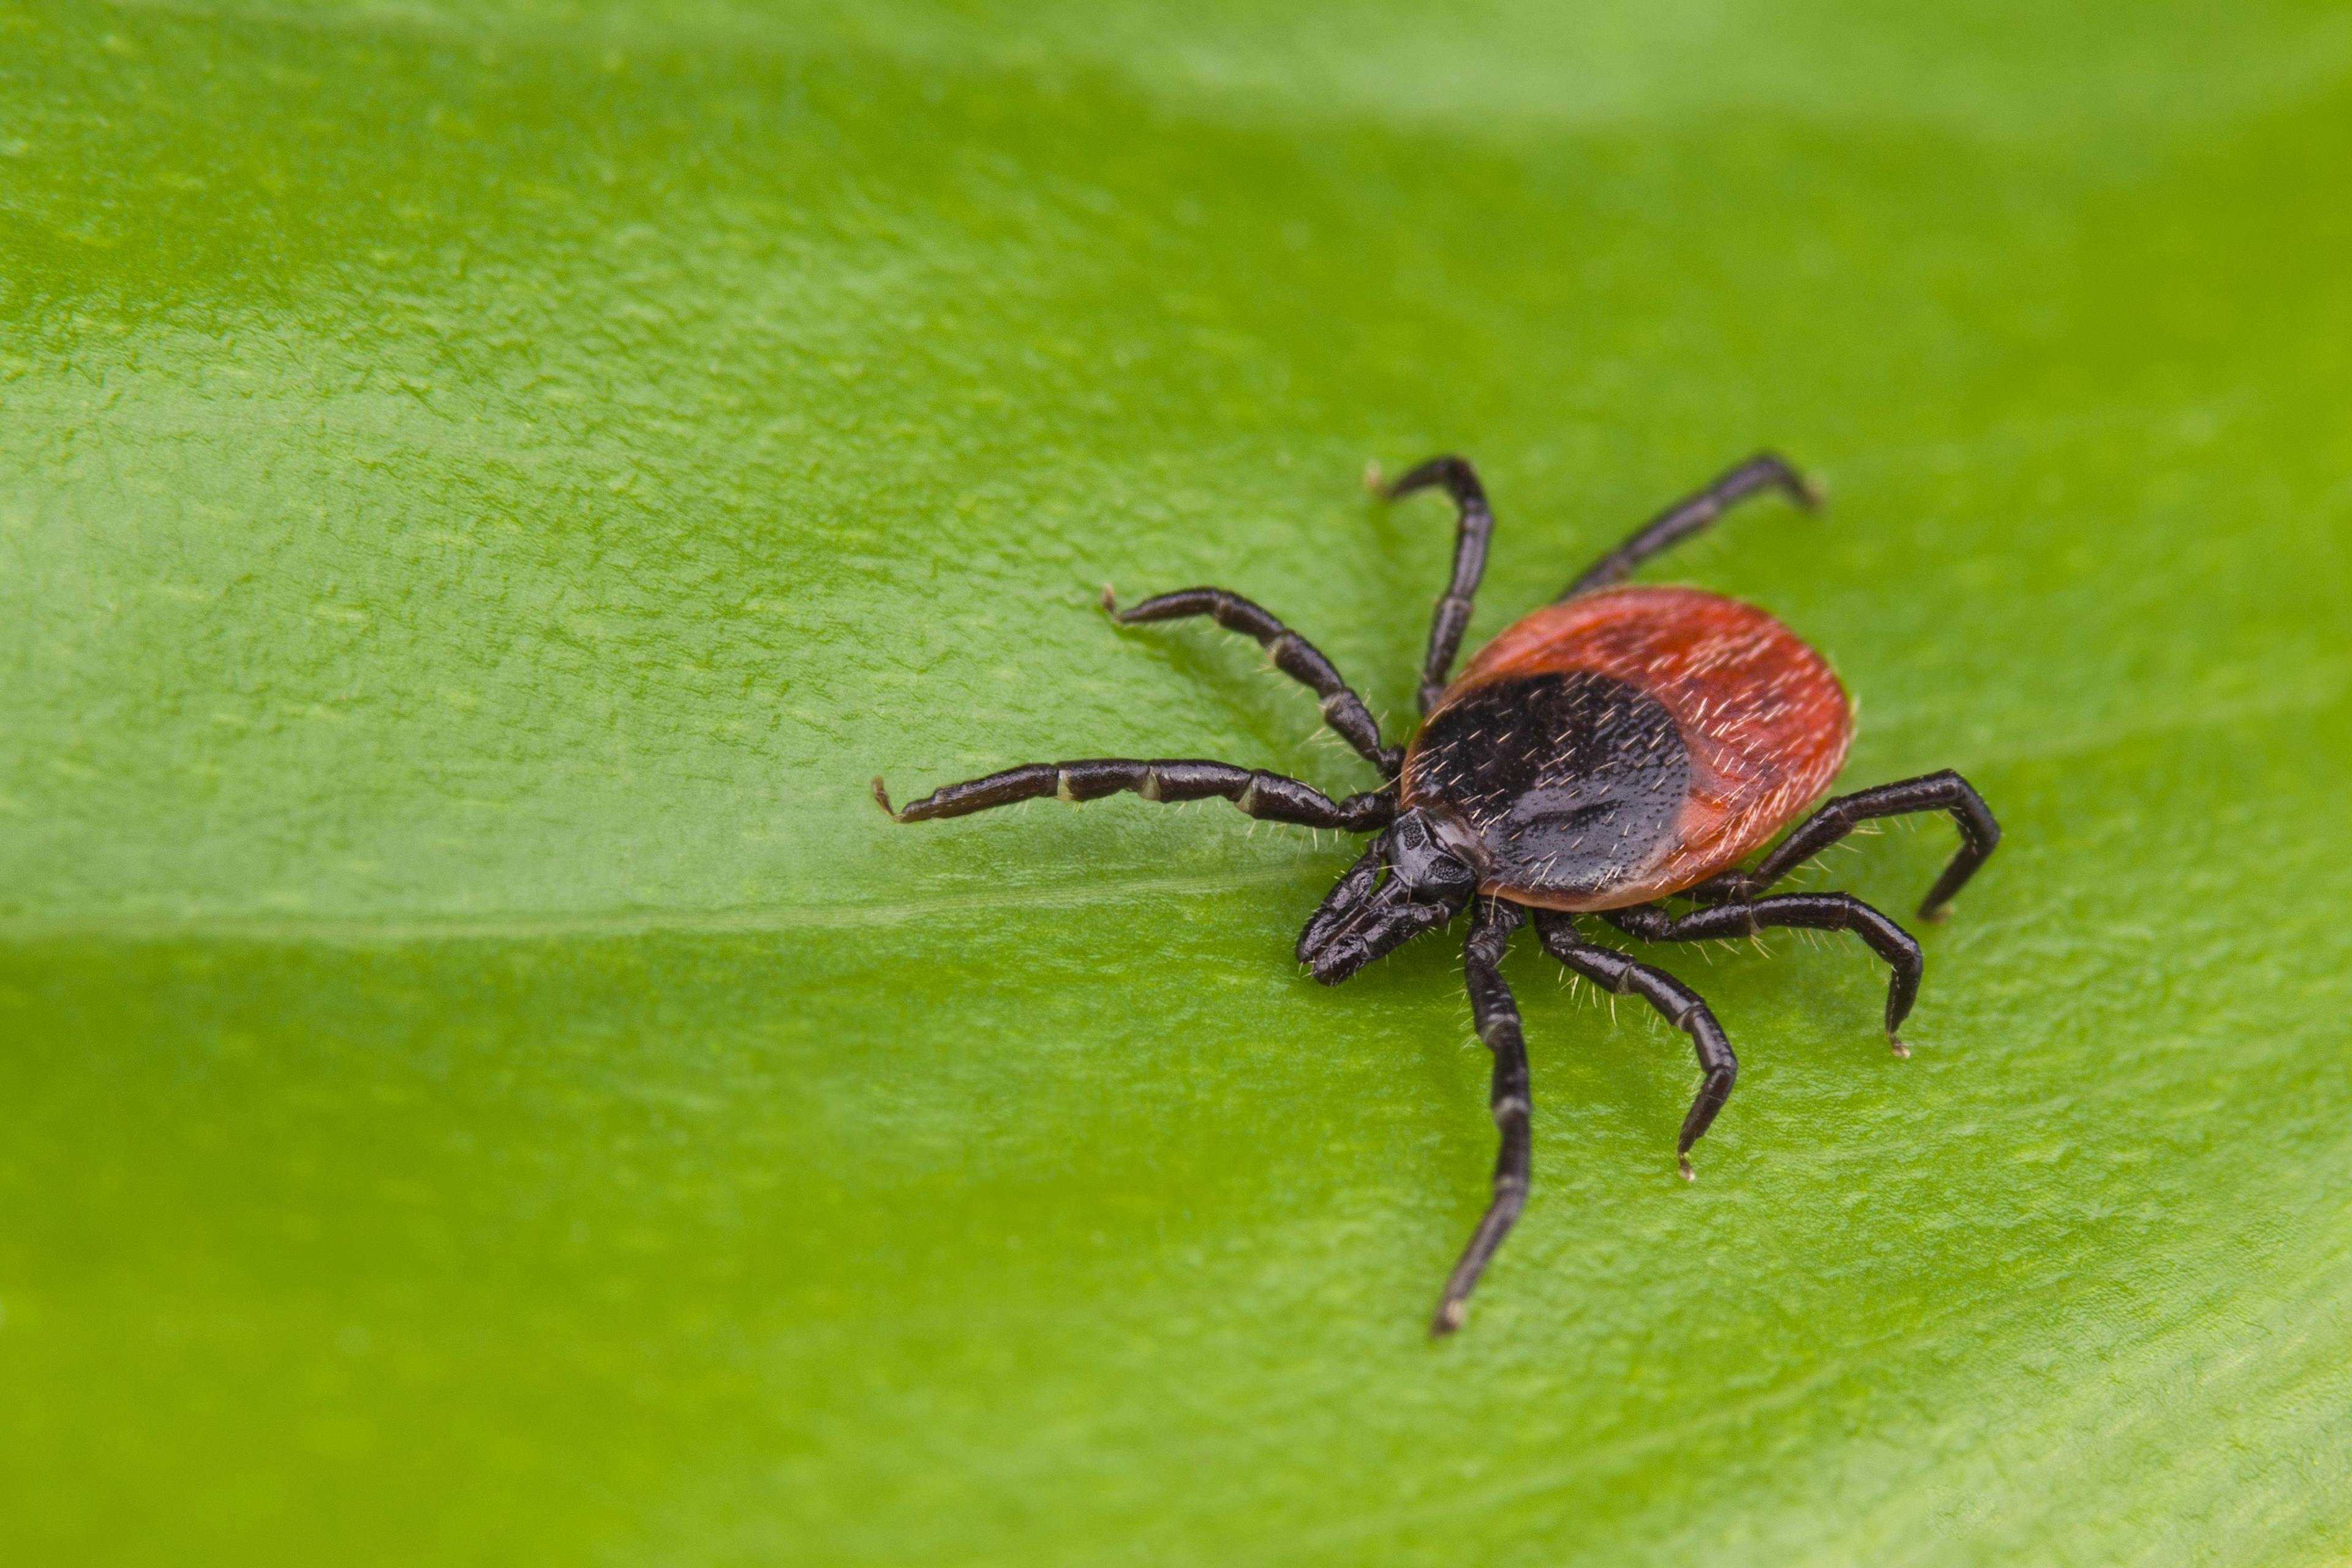 Are Cases of Lyme Disease Underreported in the US?